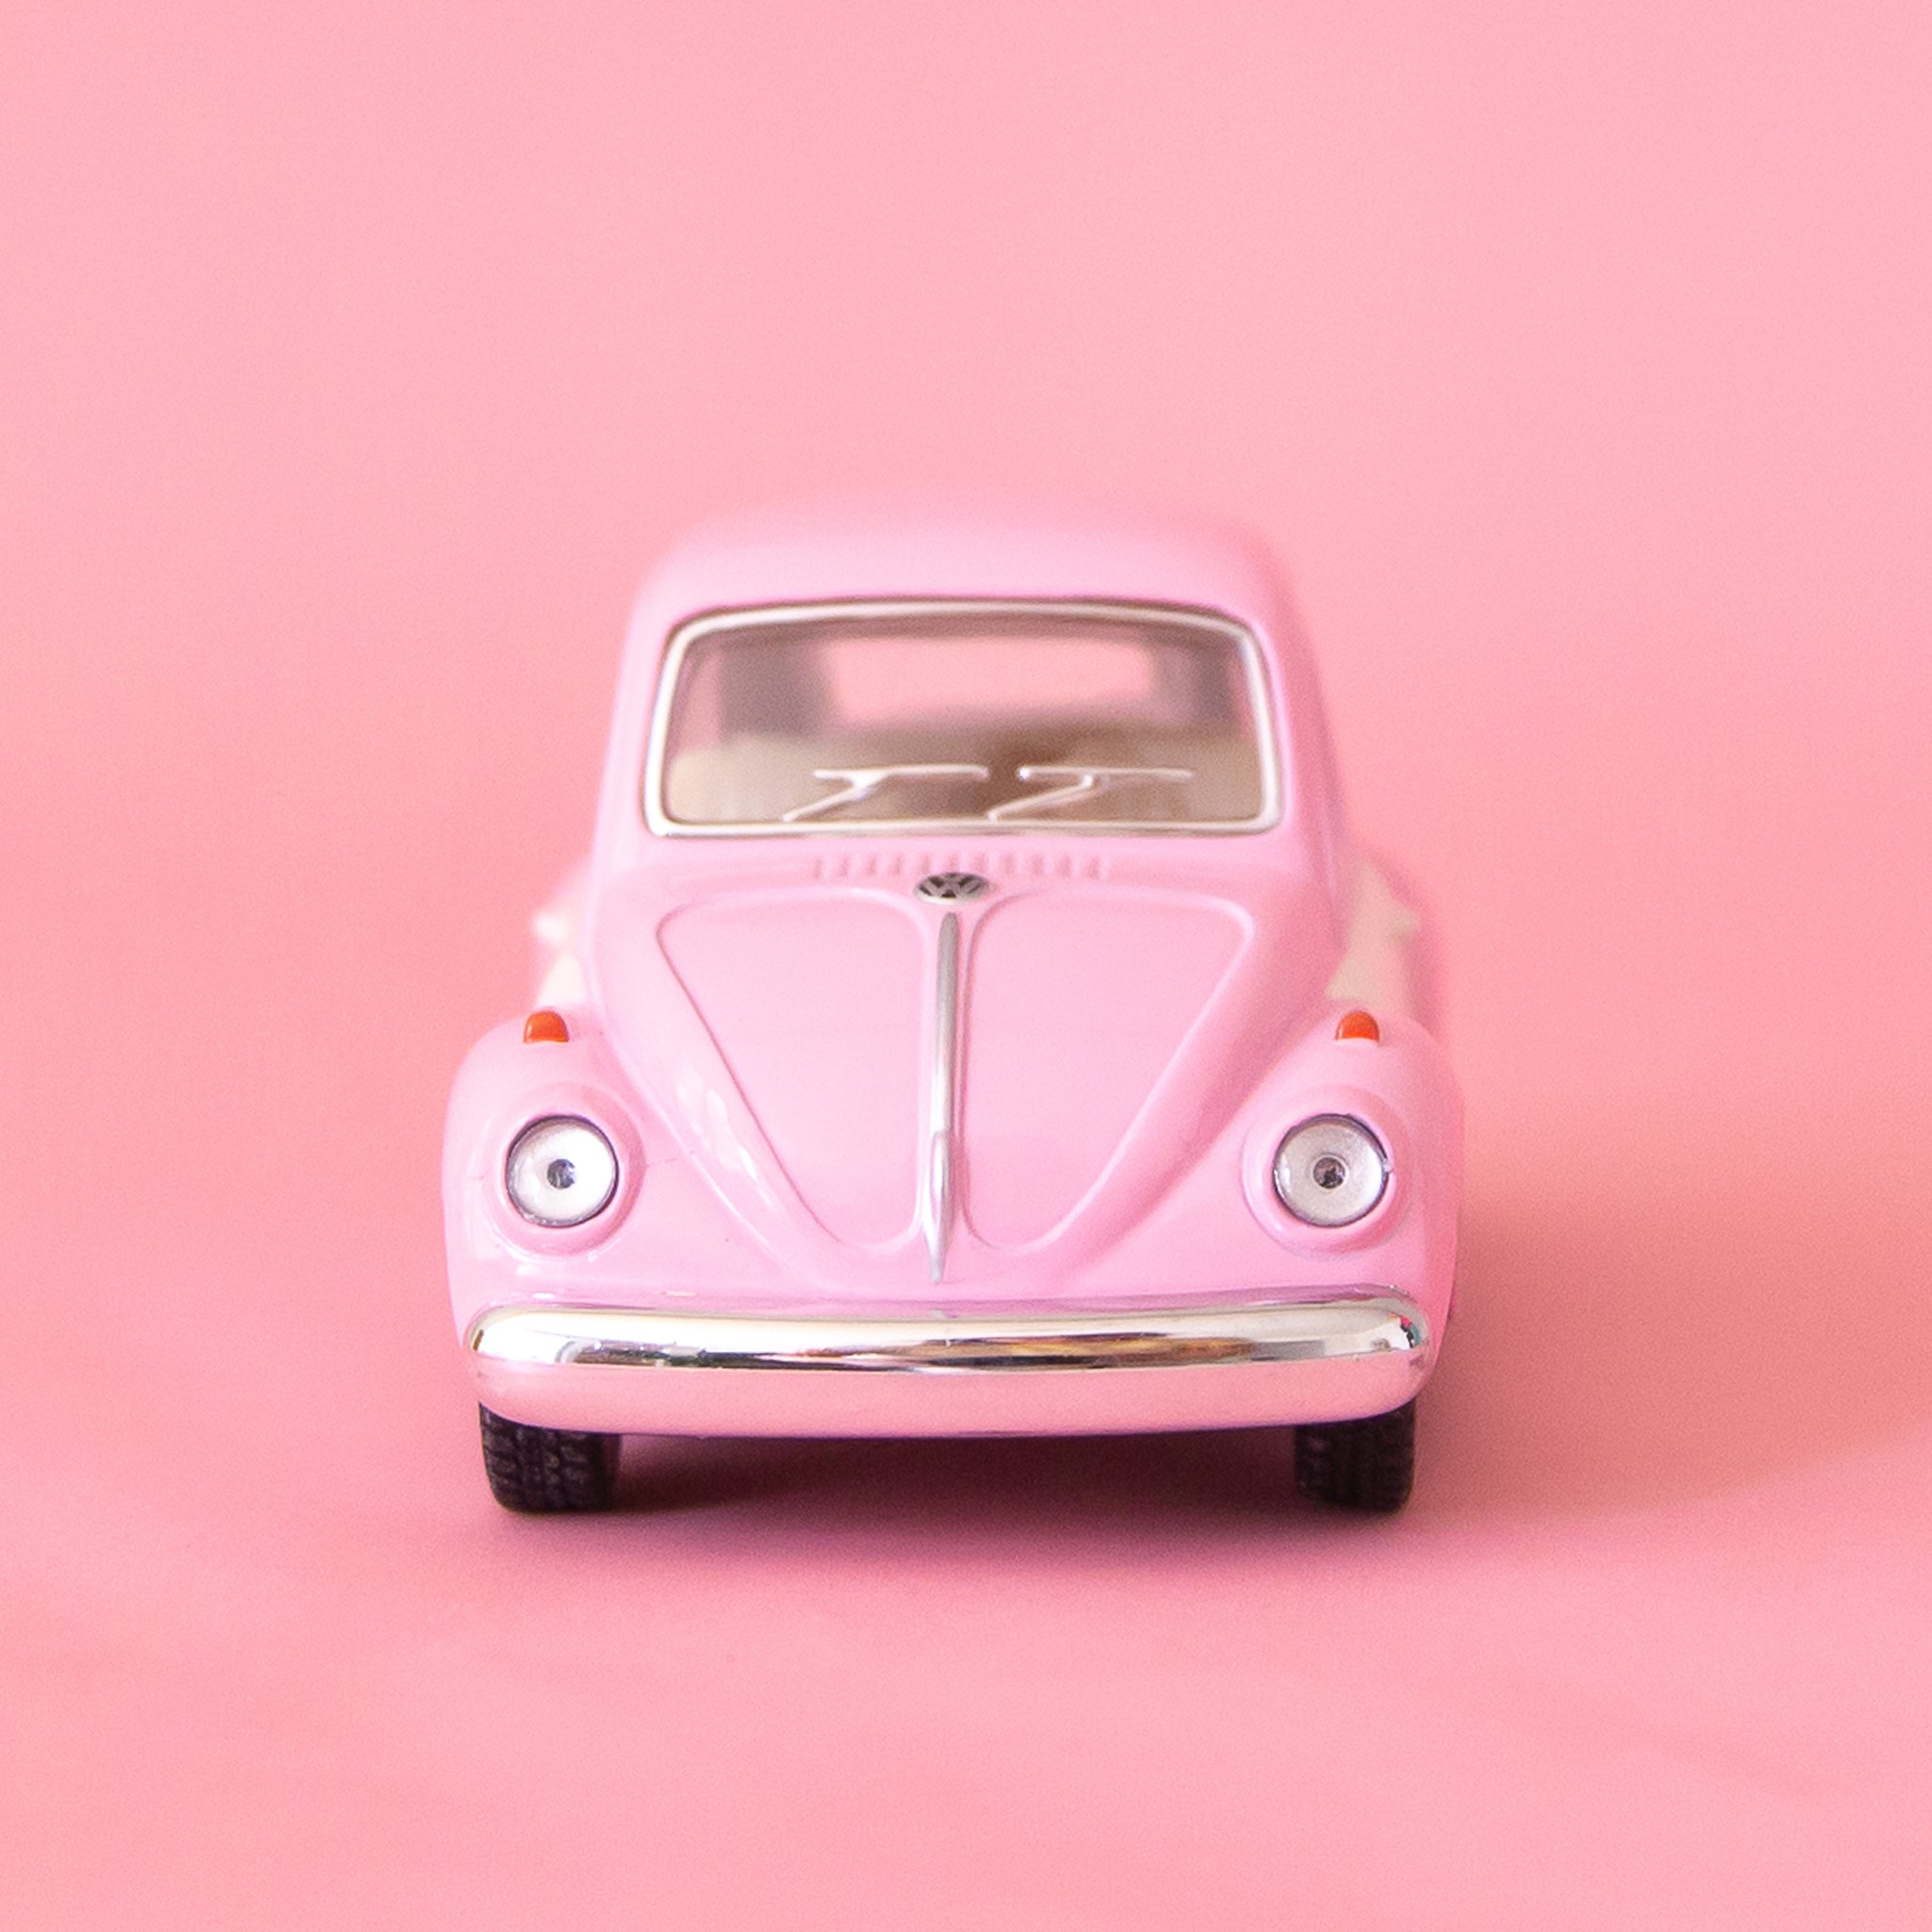 On a pink background is a pink and white two toned toy in the shape of a volkswagen beetle.